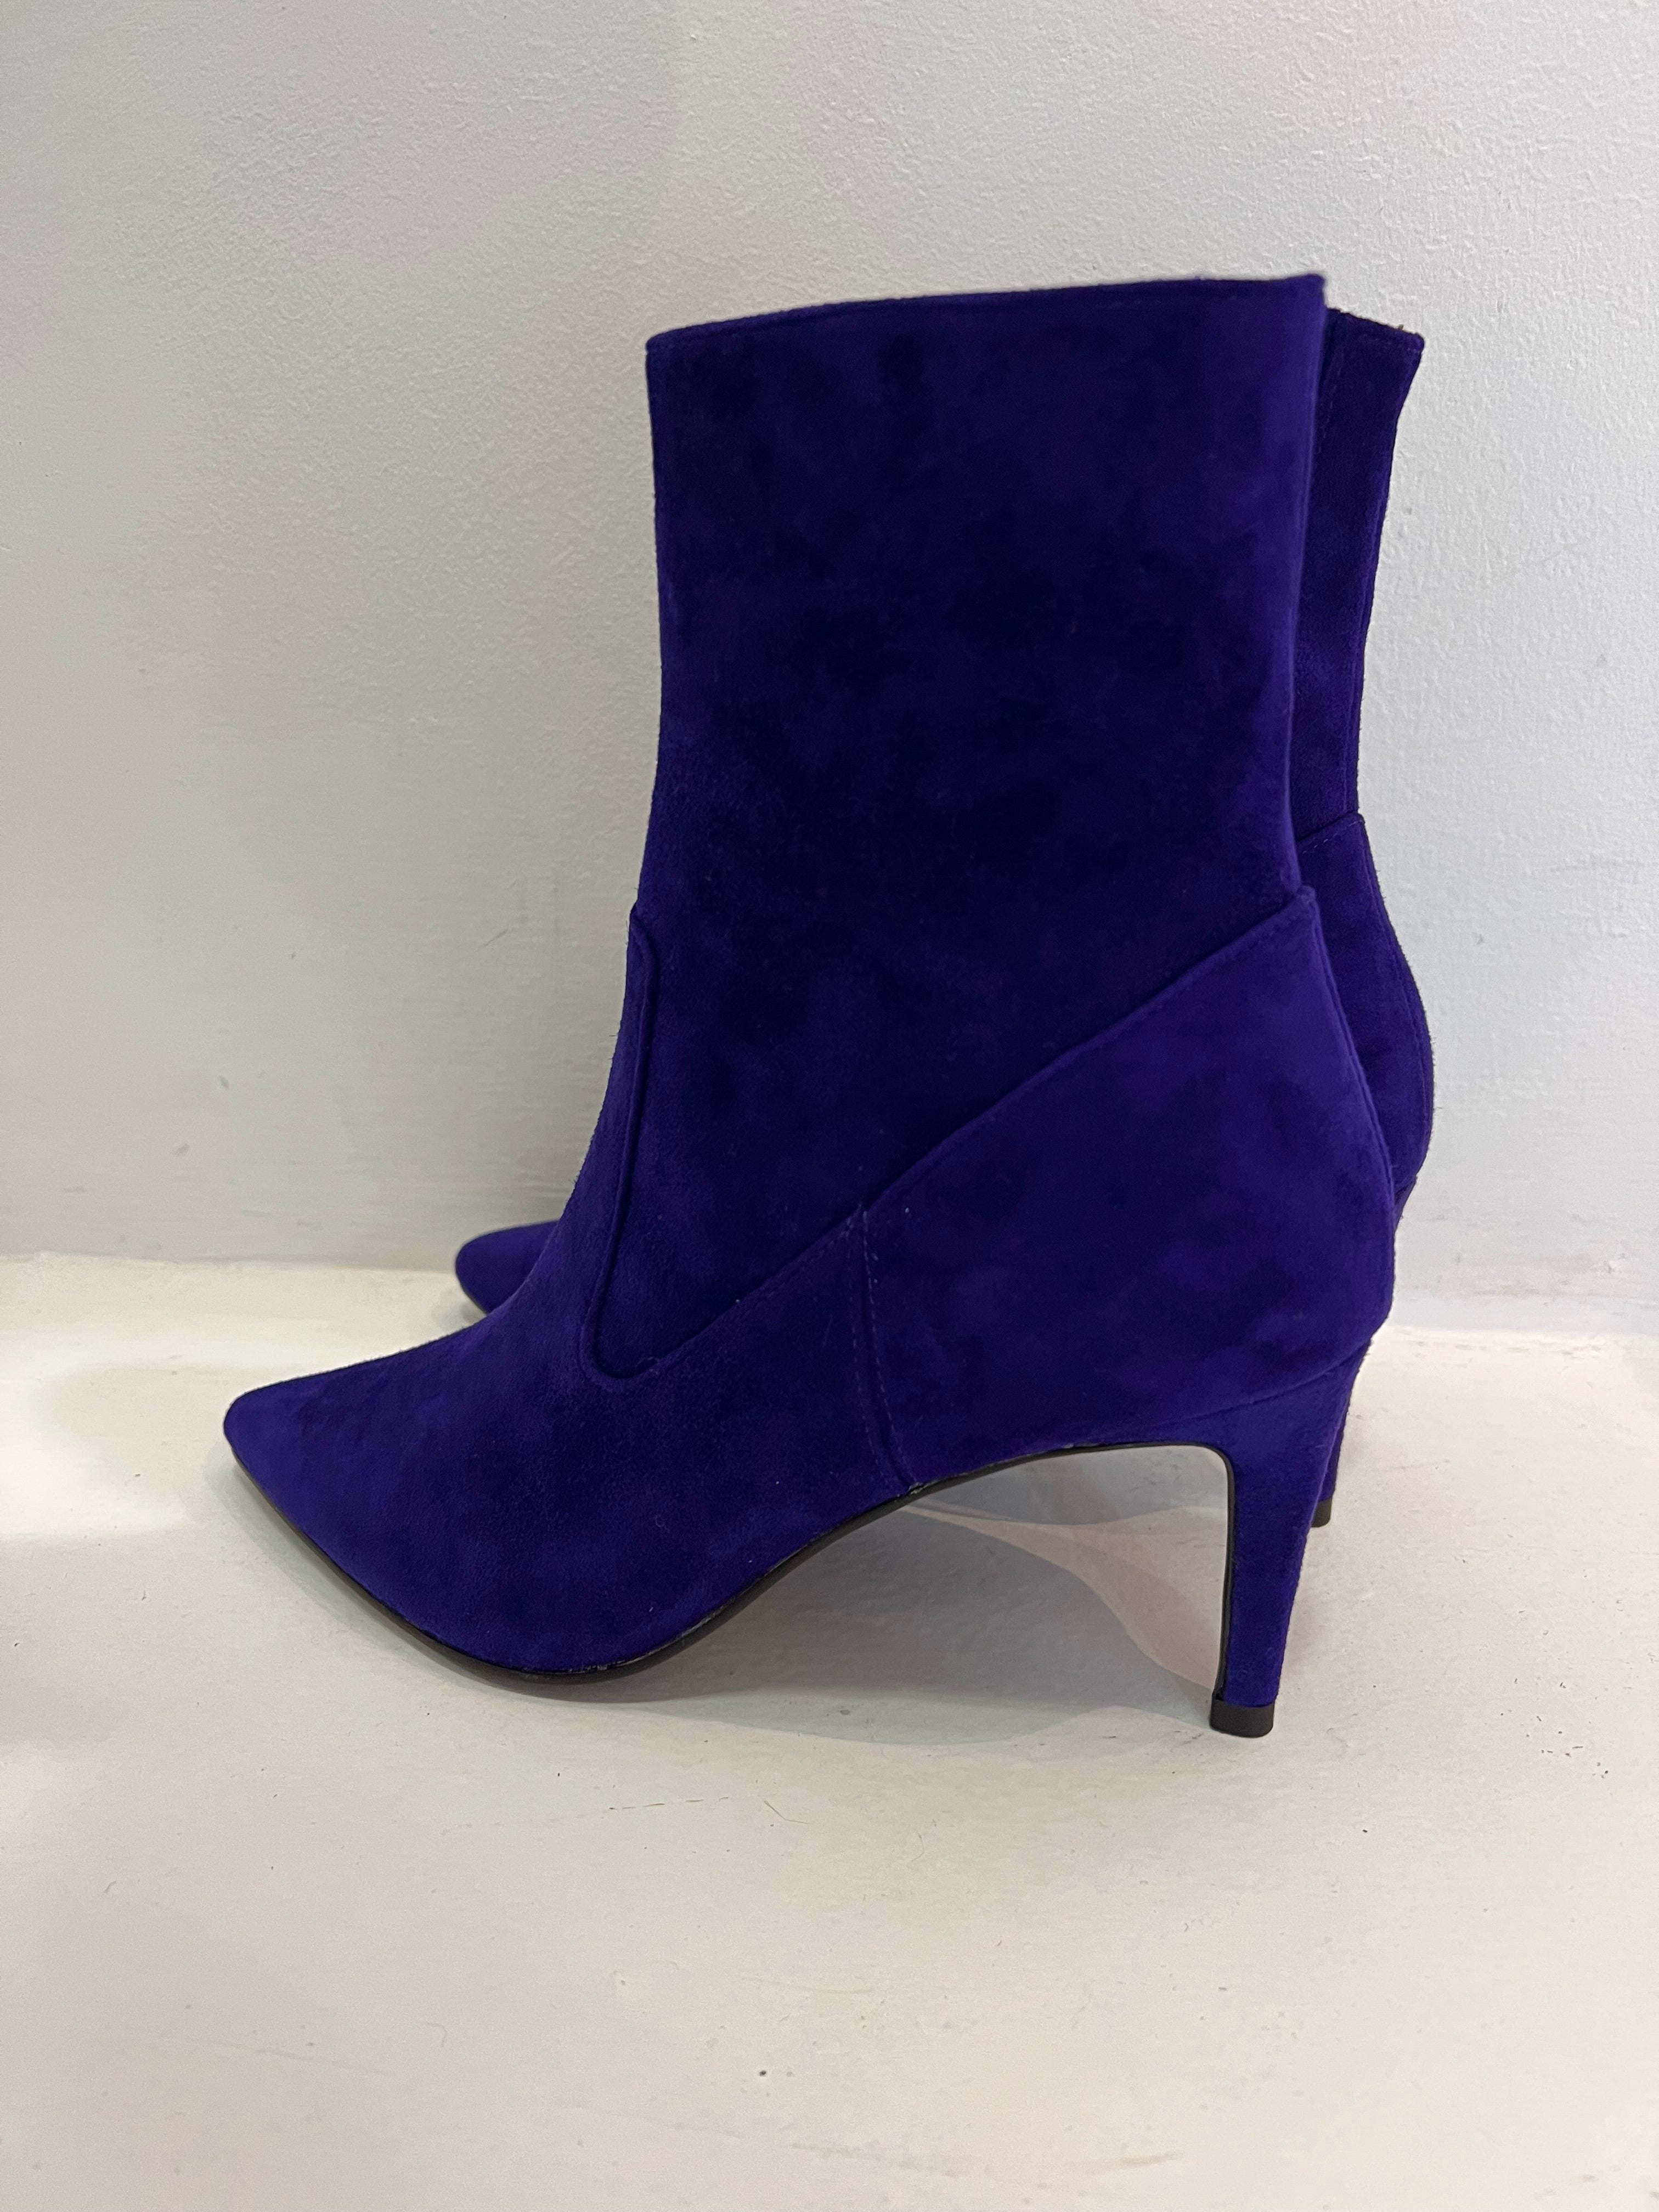 Bibi Lou Violet Suede Ankle Boot